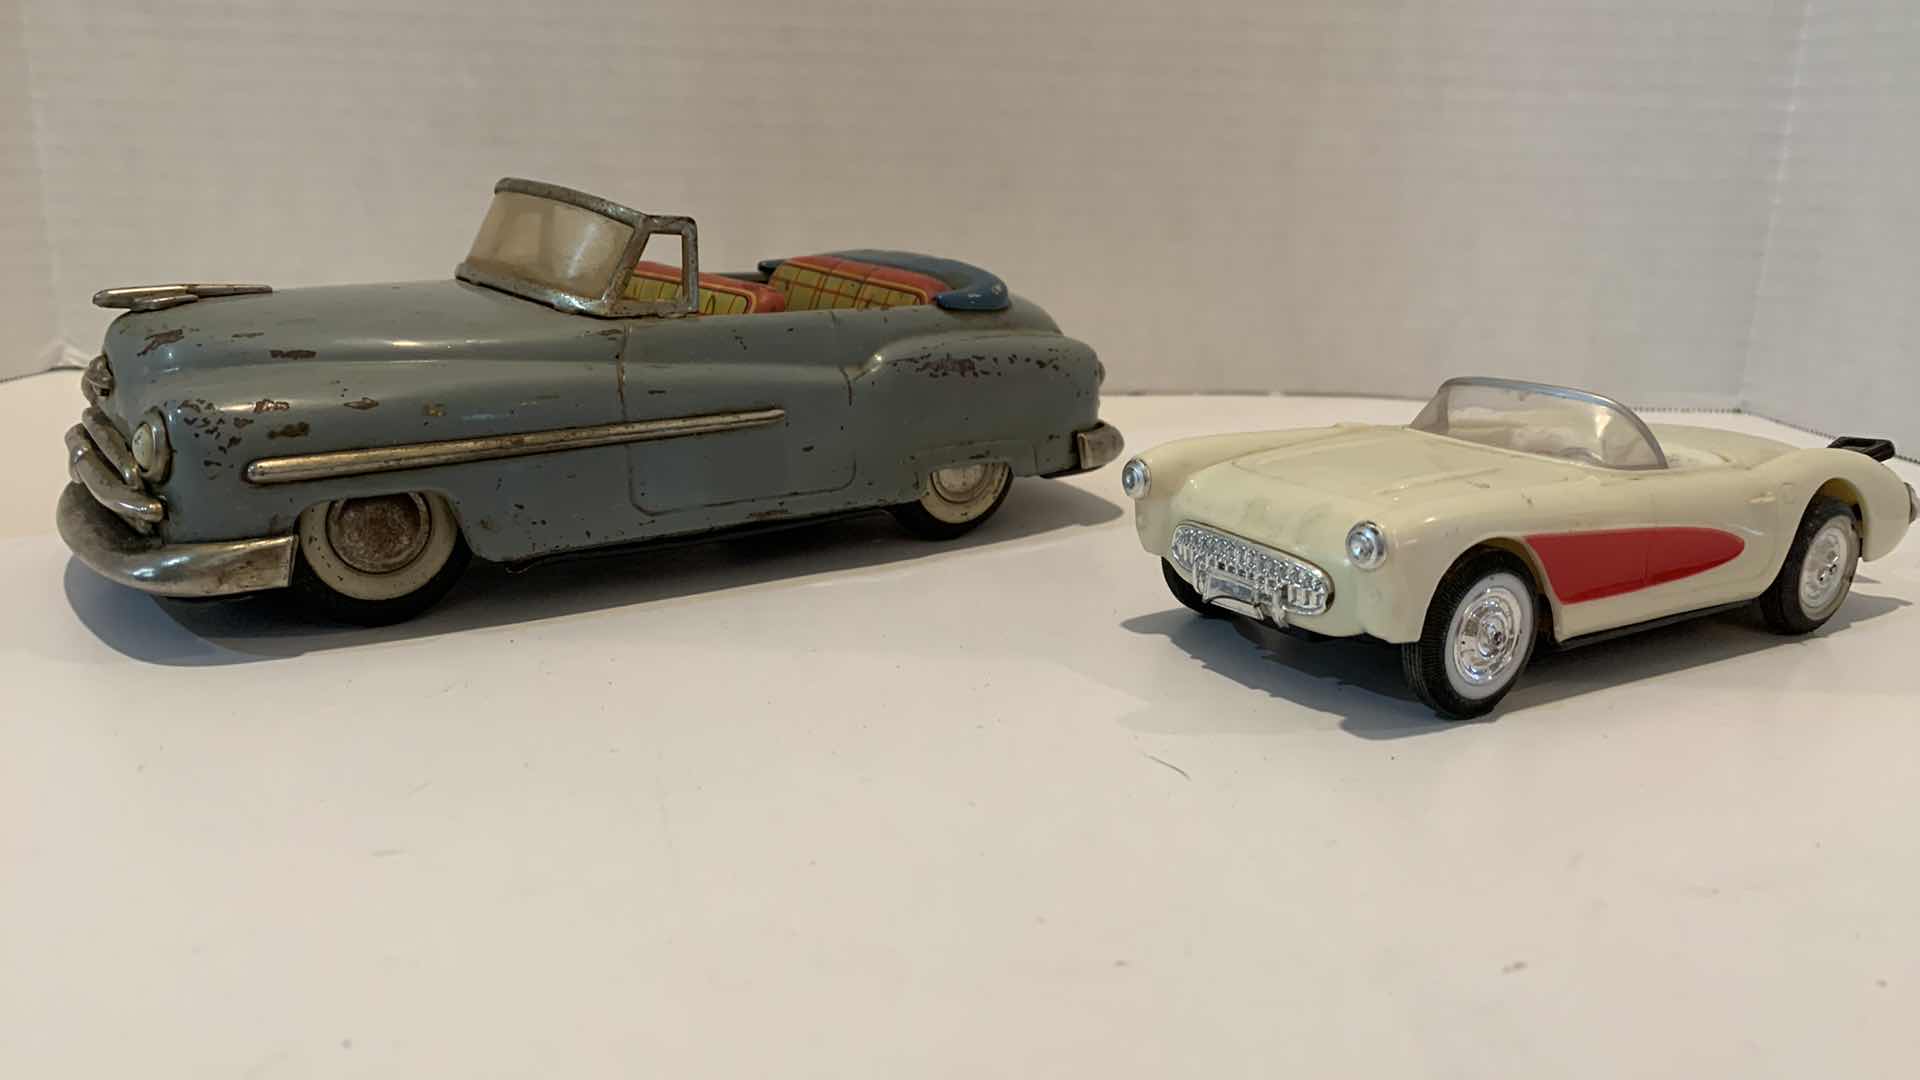 Photo 1 of 2 VINTAGE COLLECTABLE CARS